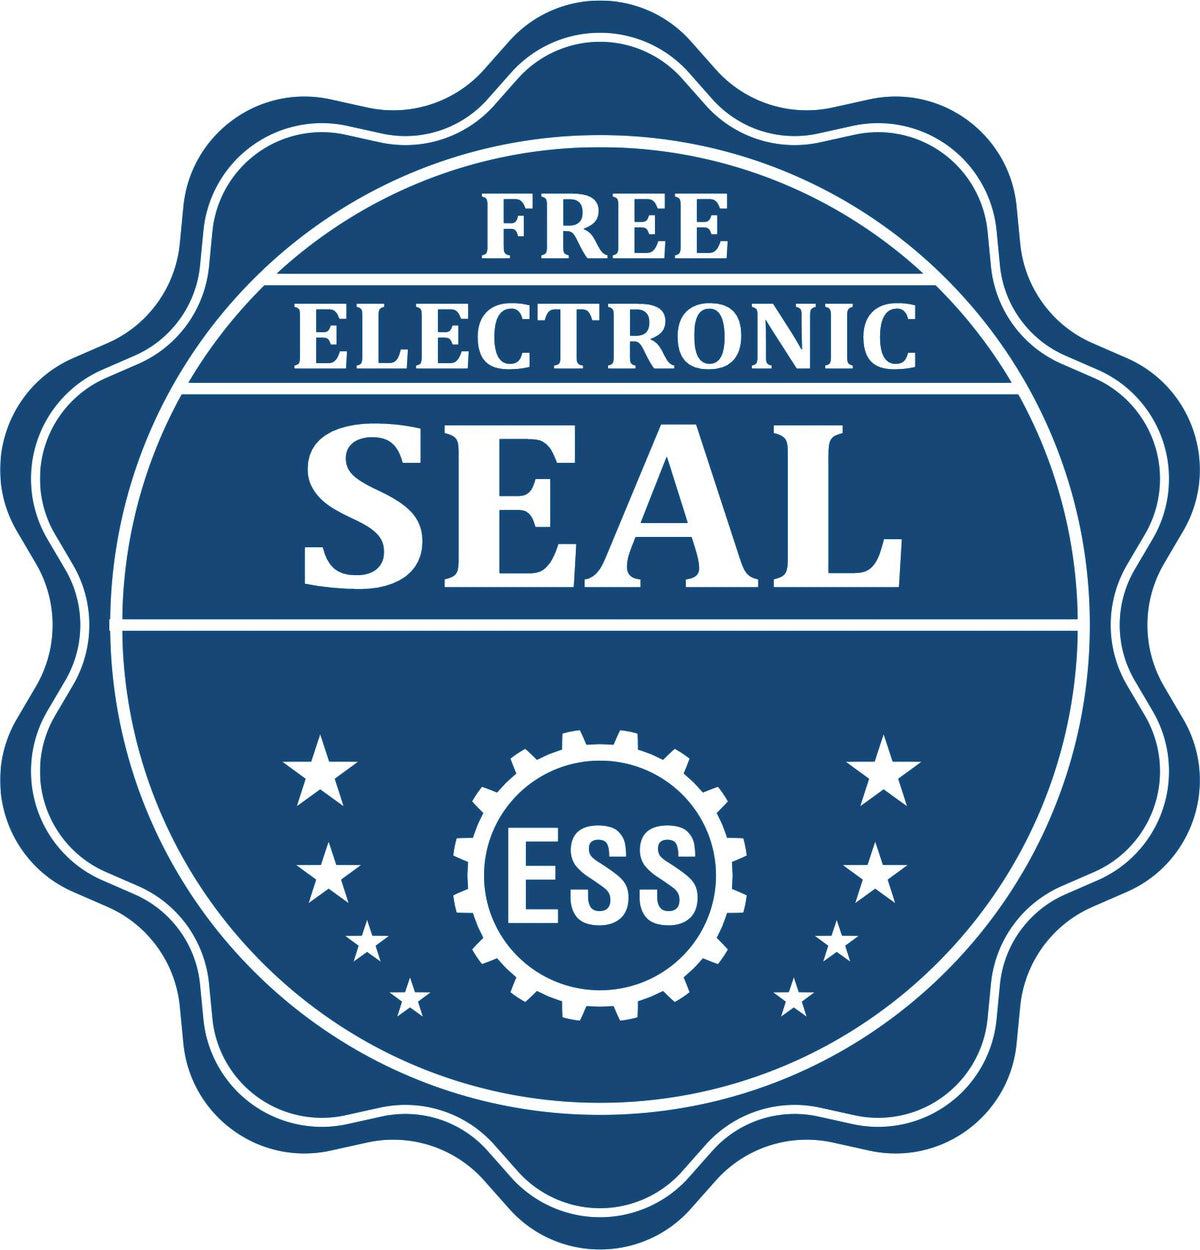 A badge showing a free electronic seal for the Premium MaxLight Pre-Inked Texas Geology Stamp with stars and the ESS gear on the emblem.